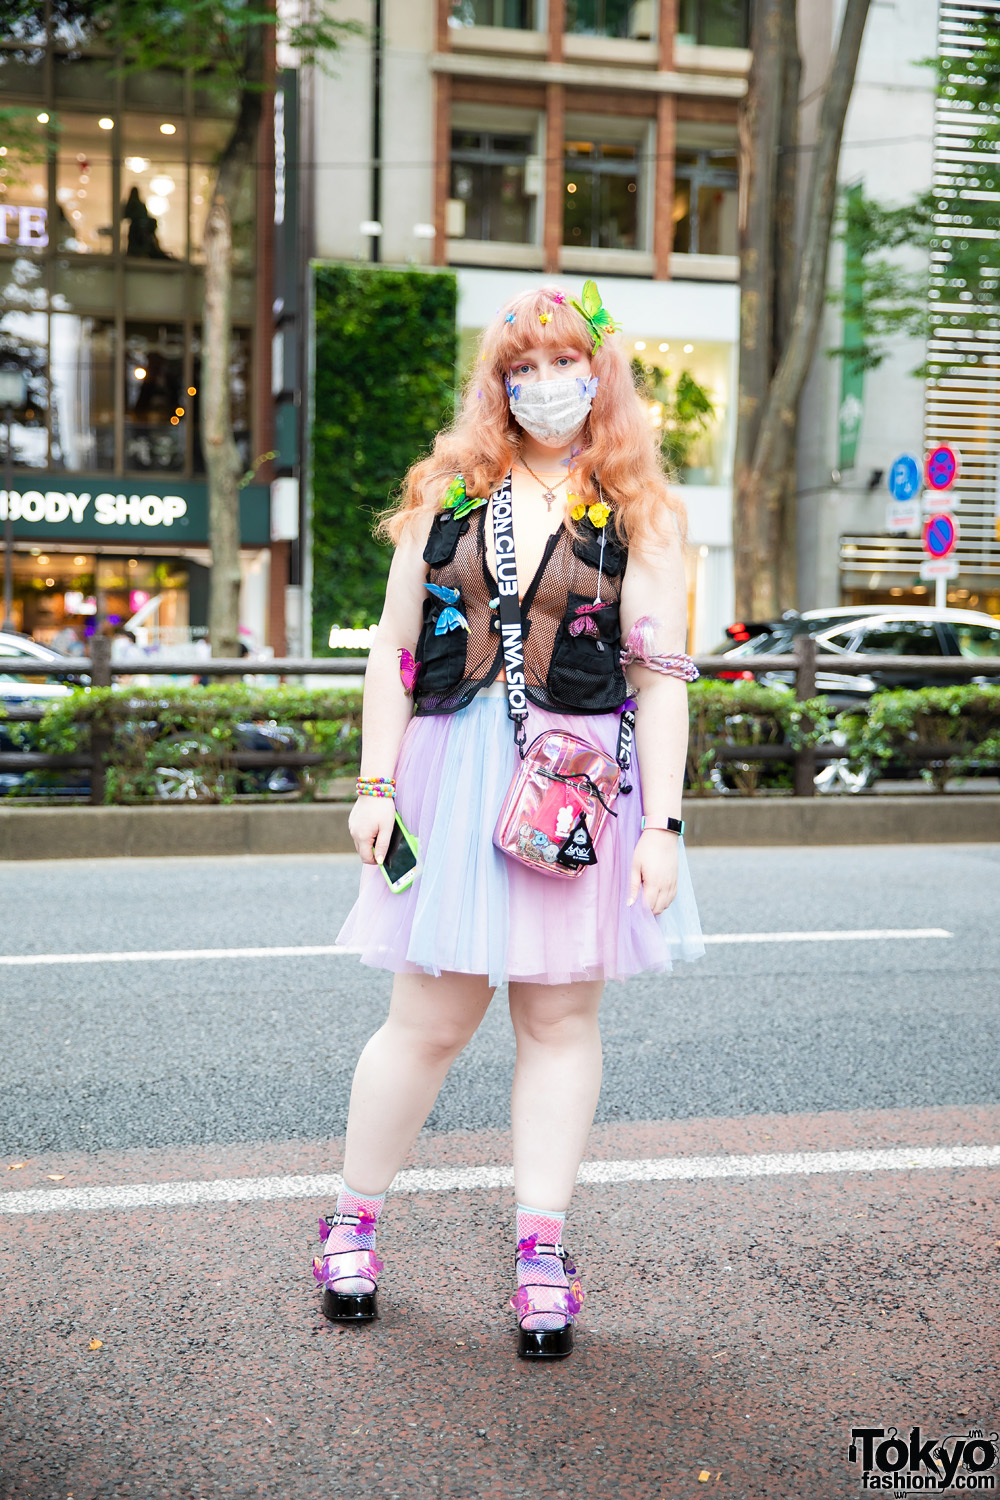 Harajuku Pastel Street Style w/ BT21 Face Mask, Handmade Butterfly Clips, Mesh Utility Vest, Tulle Skirt, Invasion Club Bag & Sugar Thrillz Sandals